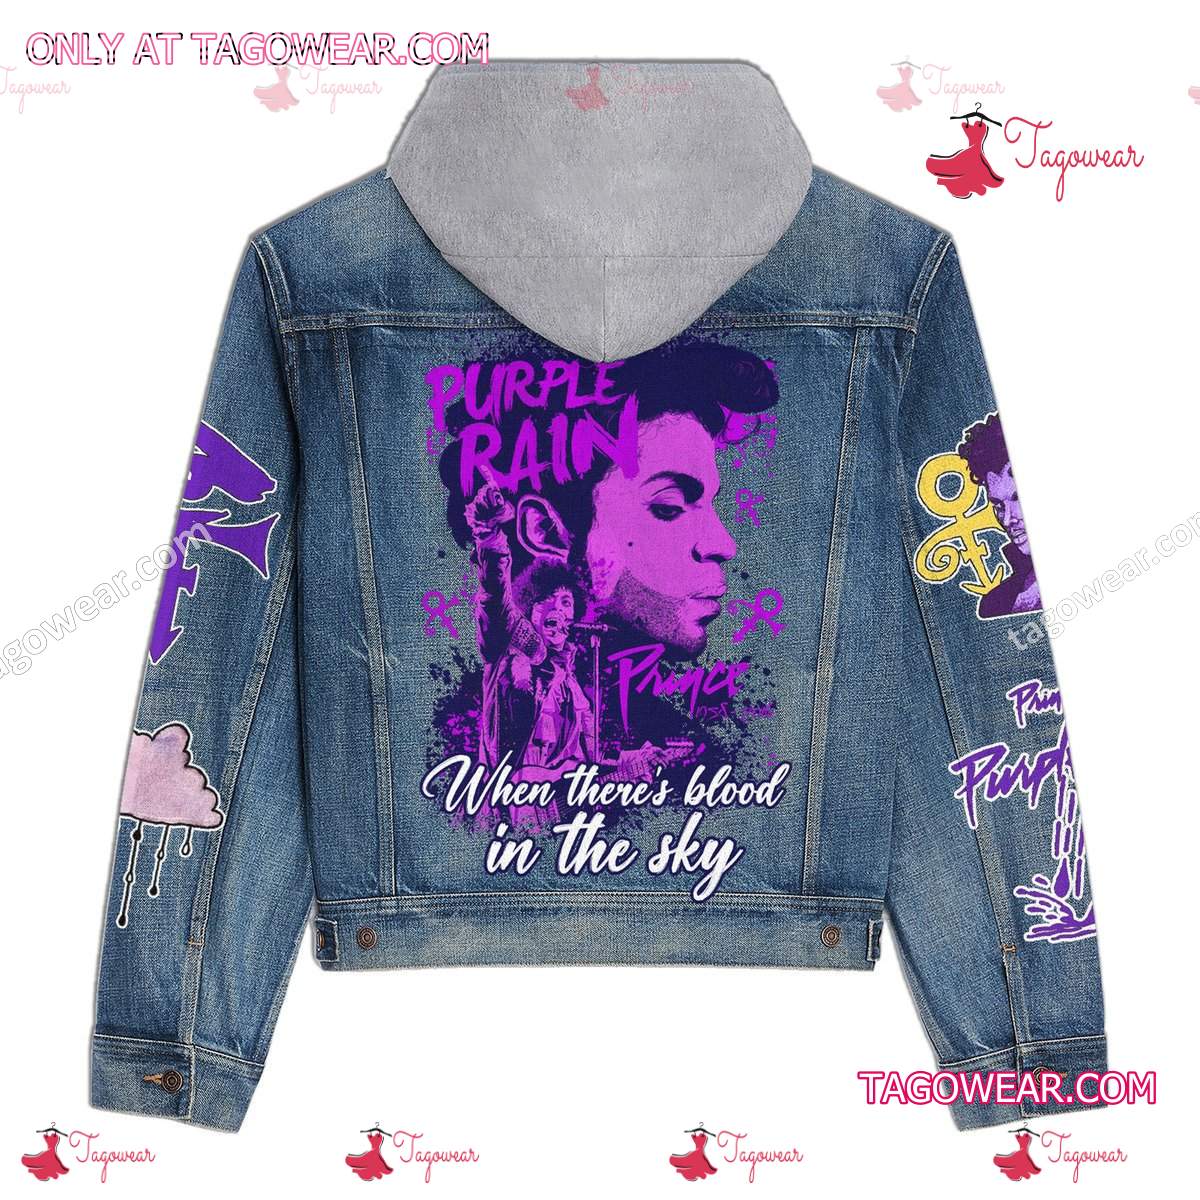 Prince Purple Rain When There's Blood In The Sky Jean Jacket Hoodie a